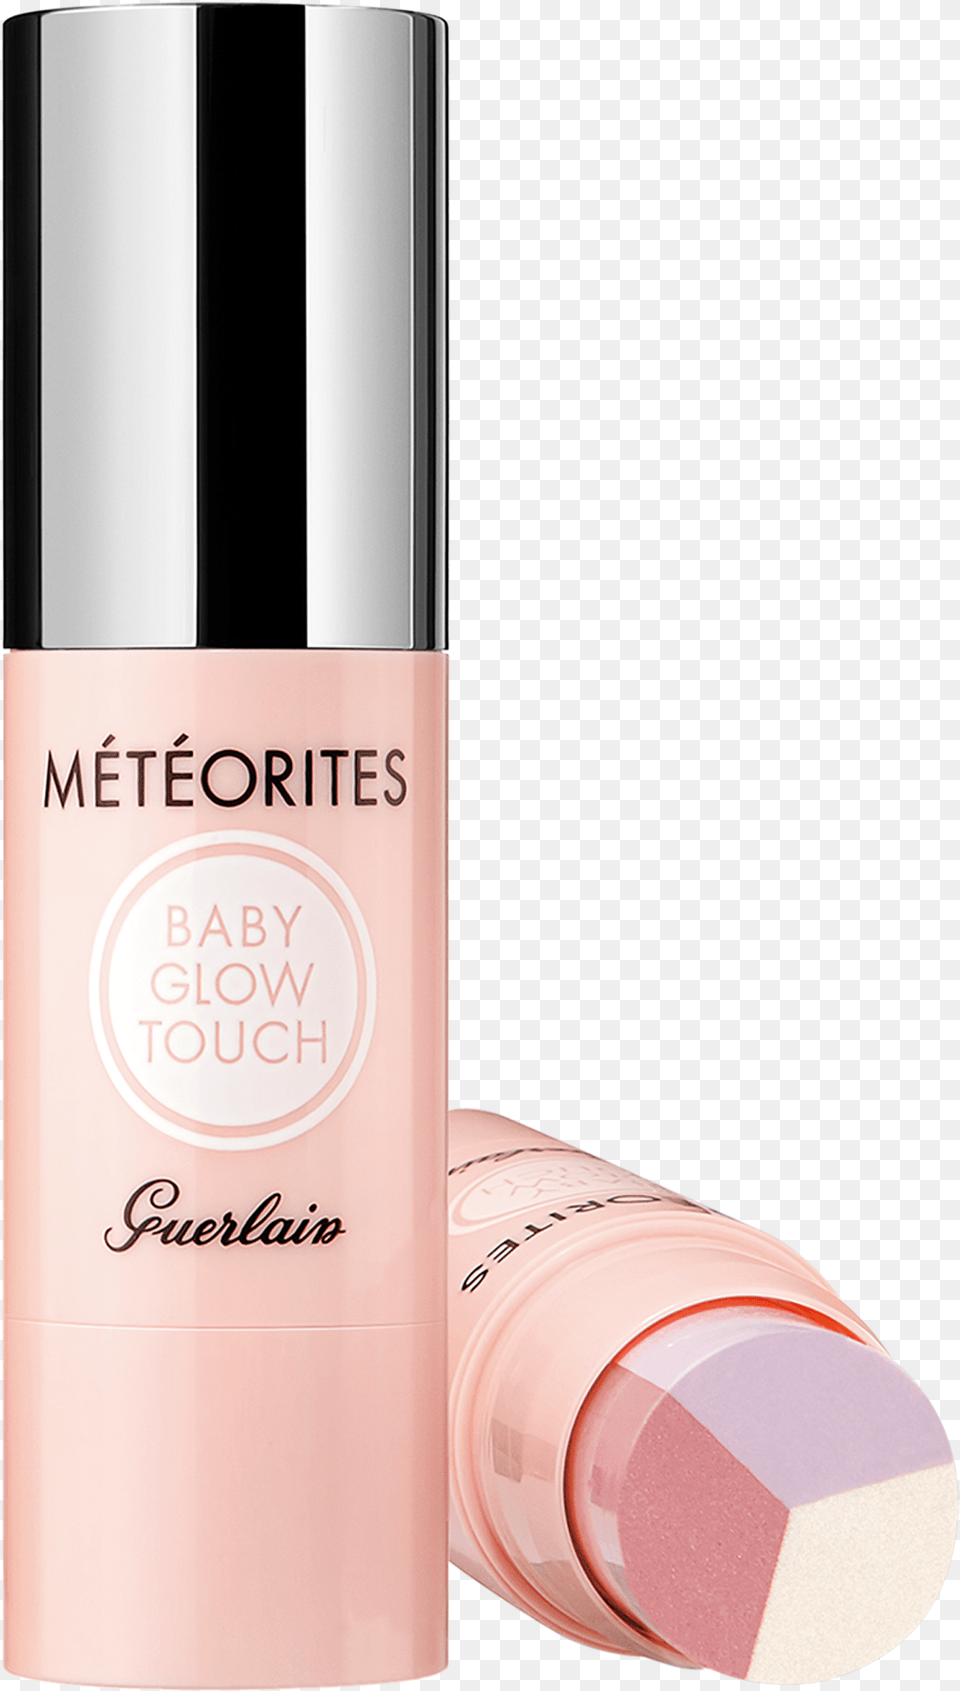 Mtorites Baby Glow Touch Guerlain Meteorites Baby Glow Touch, Cosmetics, Lipstick Png Image